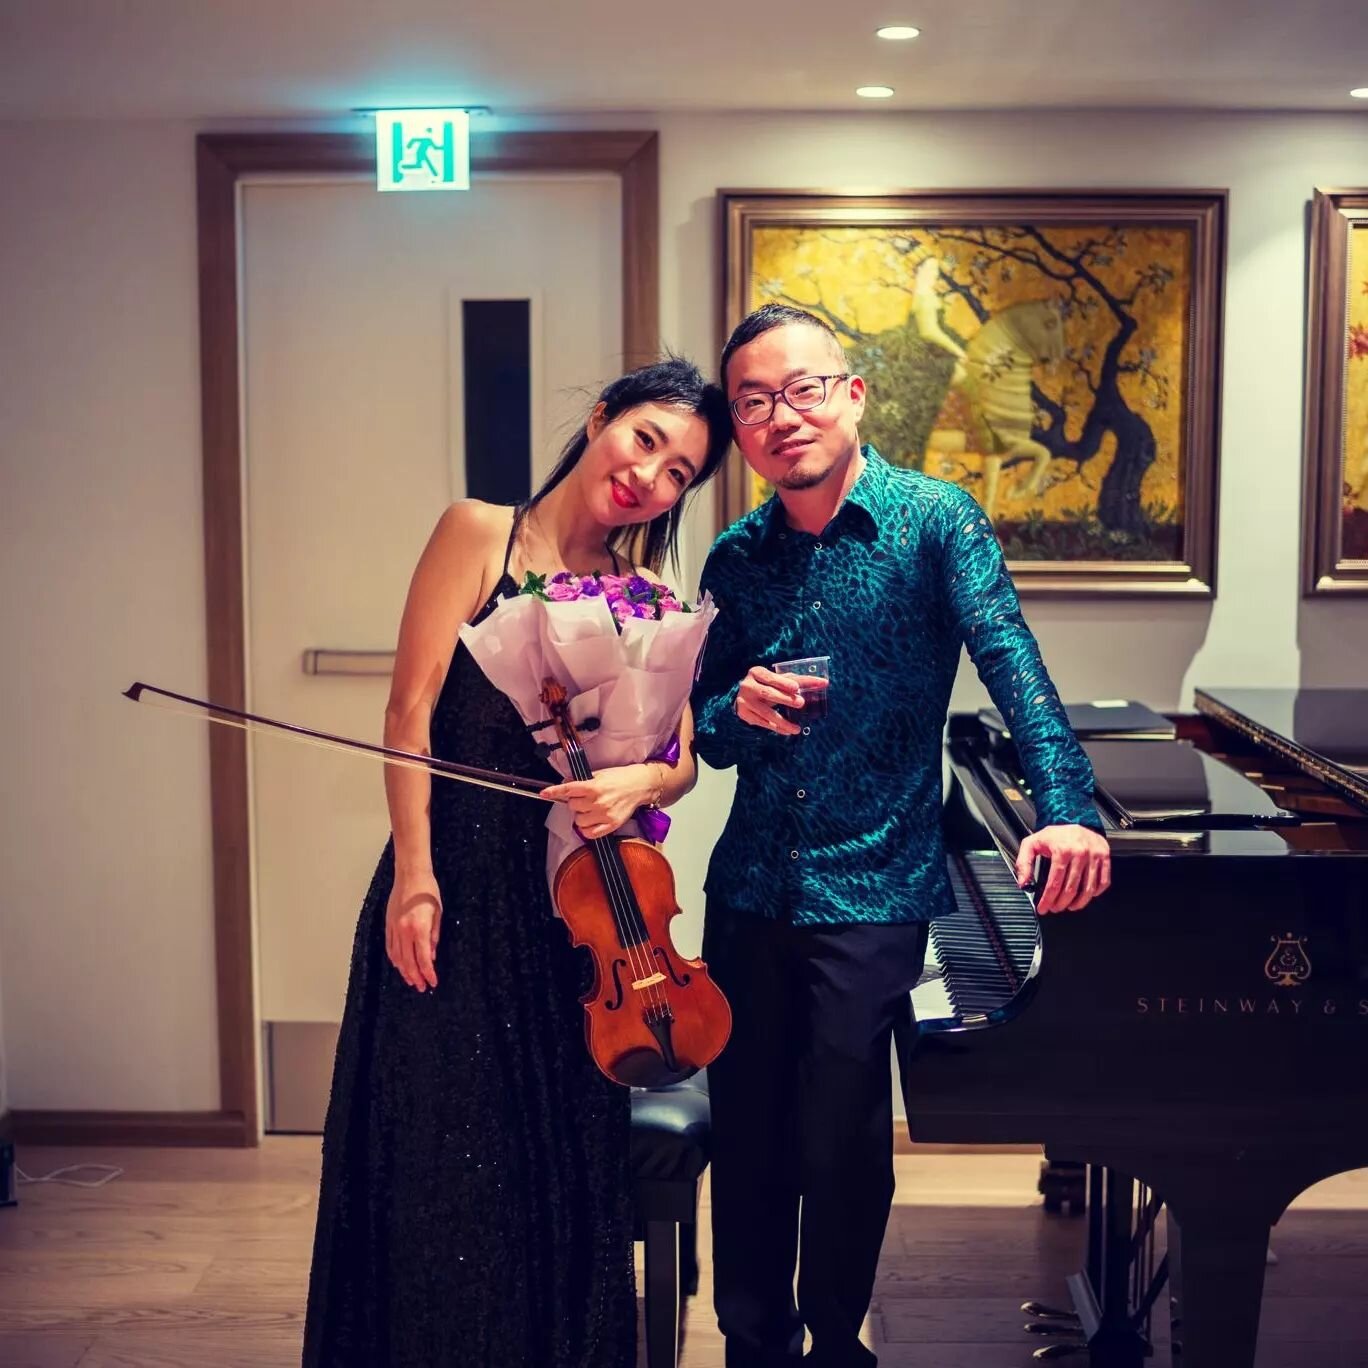 It was a great evening sharing a French-themed programme from a purely lyrical piece to a sensational one!

Thank you to everyone who came to give your passionate support!

Brava @rudastar 🎻

************

香港で演奏できて幸せな時間でした。
今回はフランス音楽を主軸とし、シンプルな曲から情熱